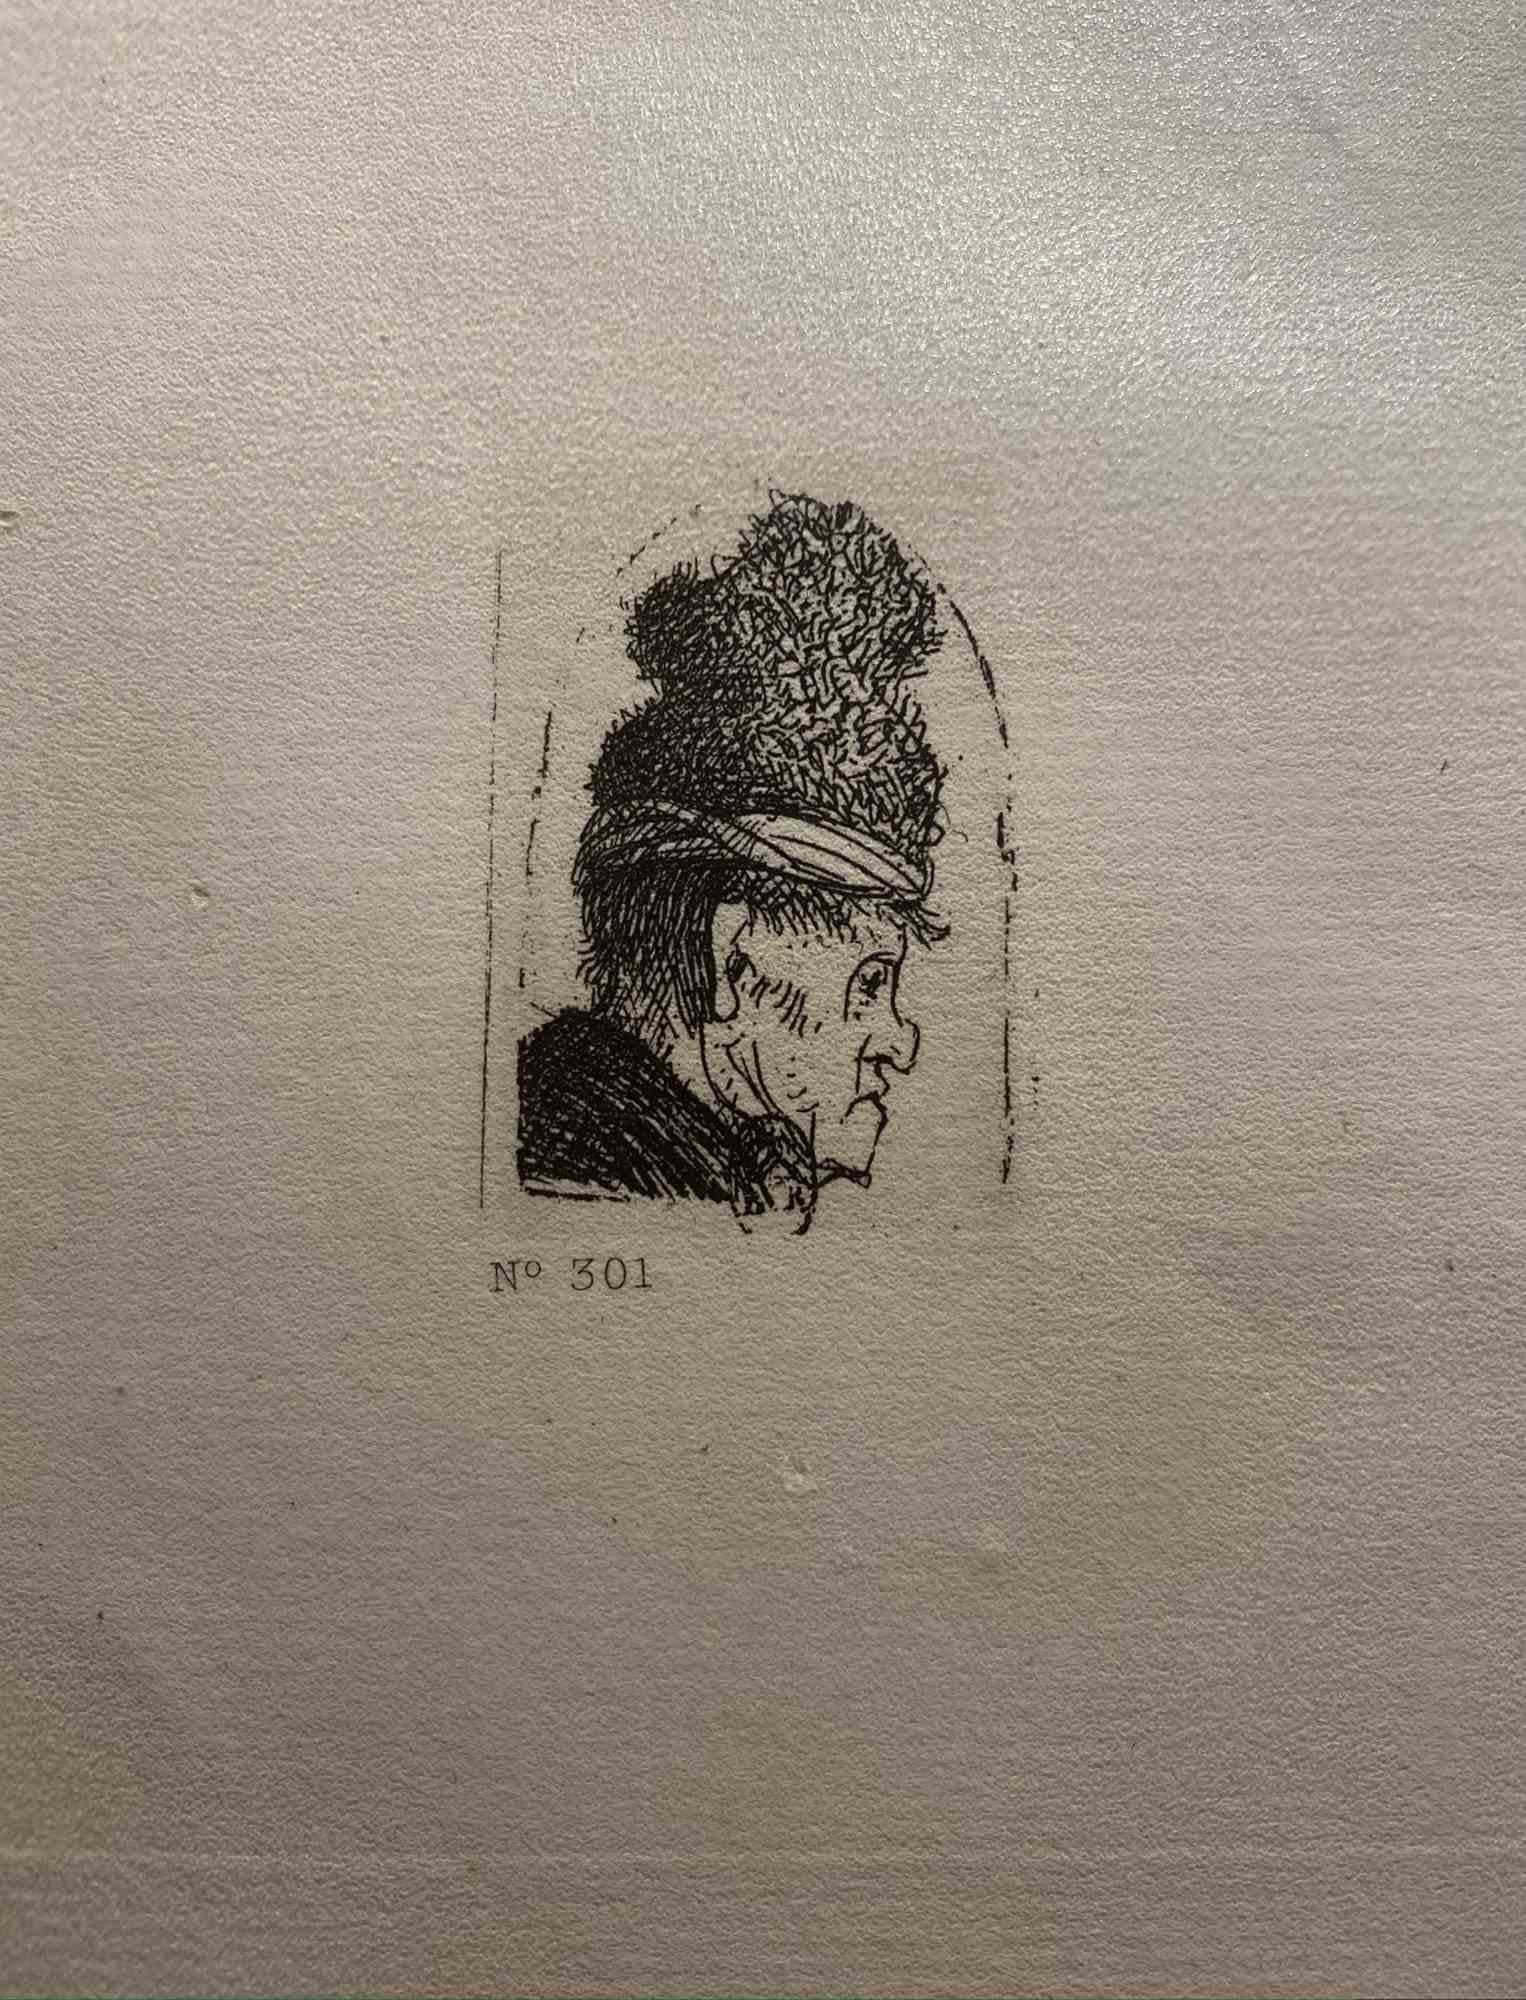 Grotesque Profile of Man with High Hat - Engravin after Rembrandt - 19th Century